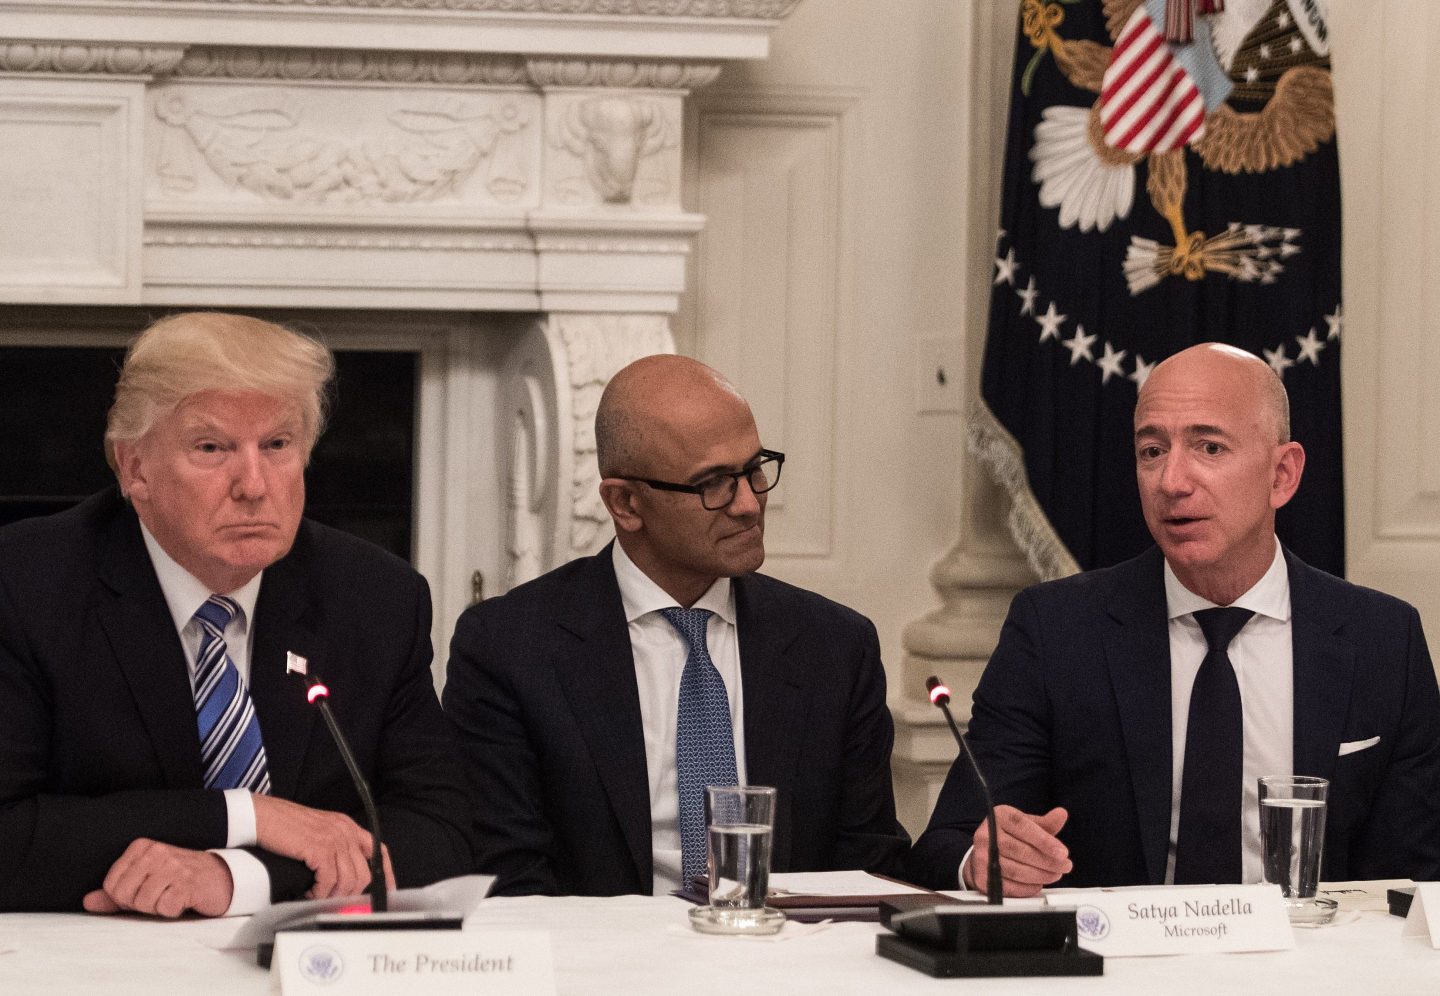 US President Donald Trump (L) and Microsoft CEO Satya Nadella (C) listen to Amazon CEO Jeff Bezos (R) during an American Technology Council roundtable at the White House in Washington, DC, on June 19, 2017. / AFP PHOTO / NICHOLAS KAMM        (Photo credit should read NICHOLAS KAMM/AFP via Getty Images)